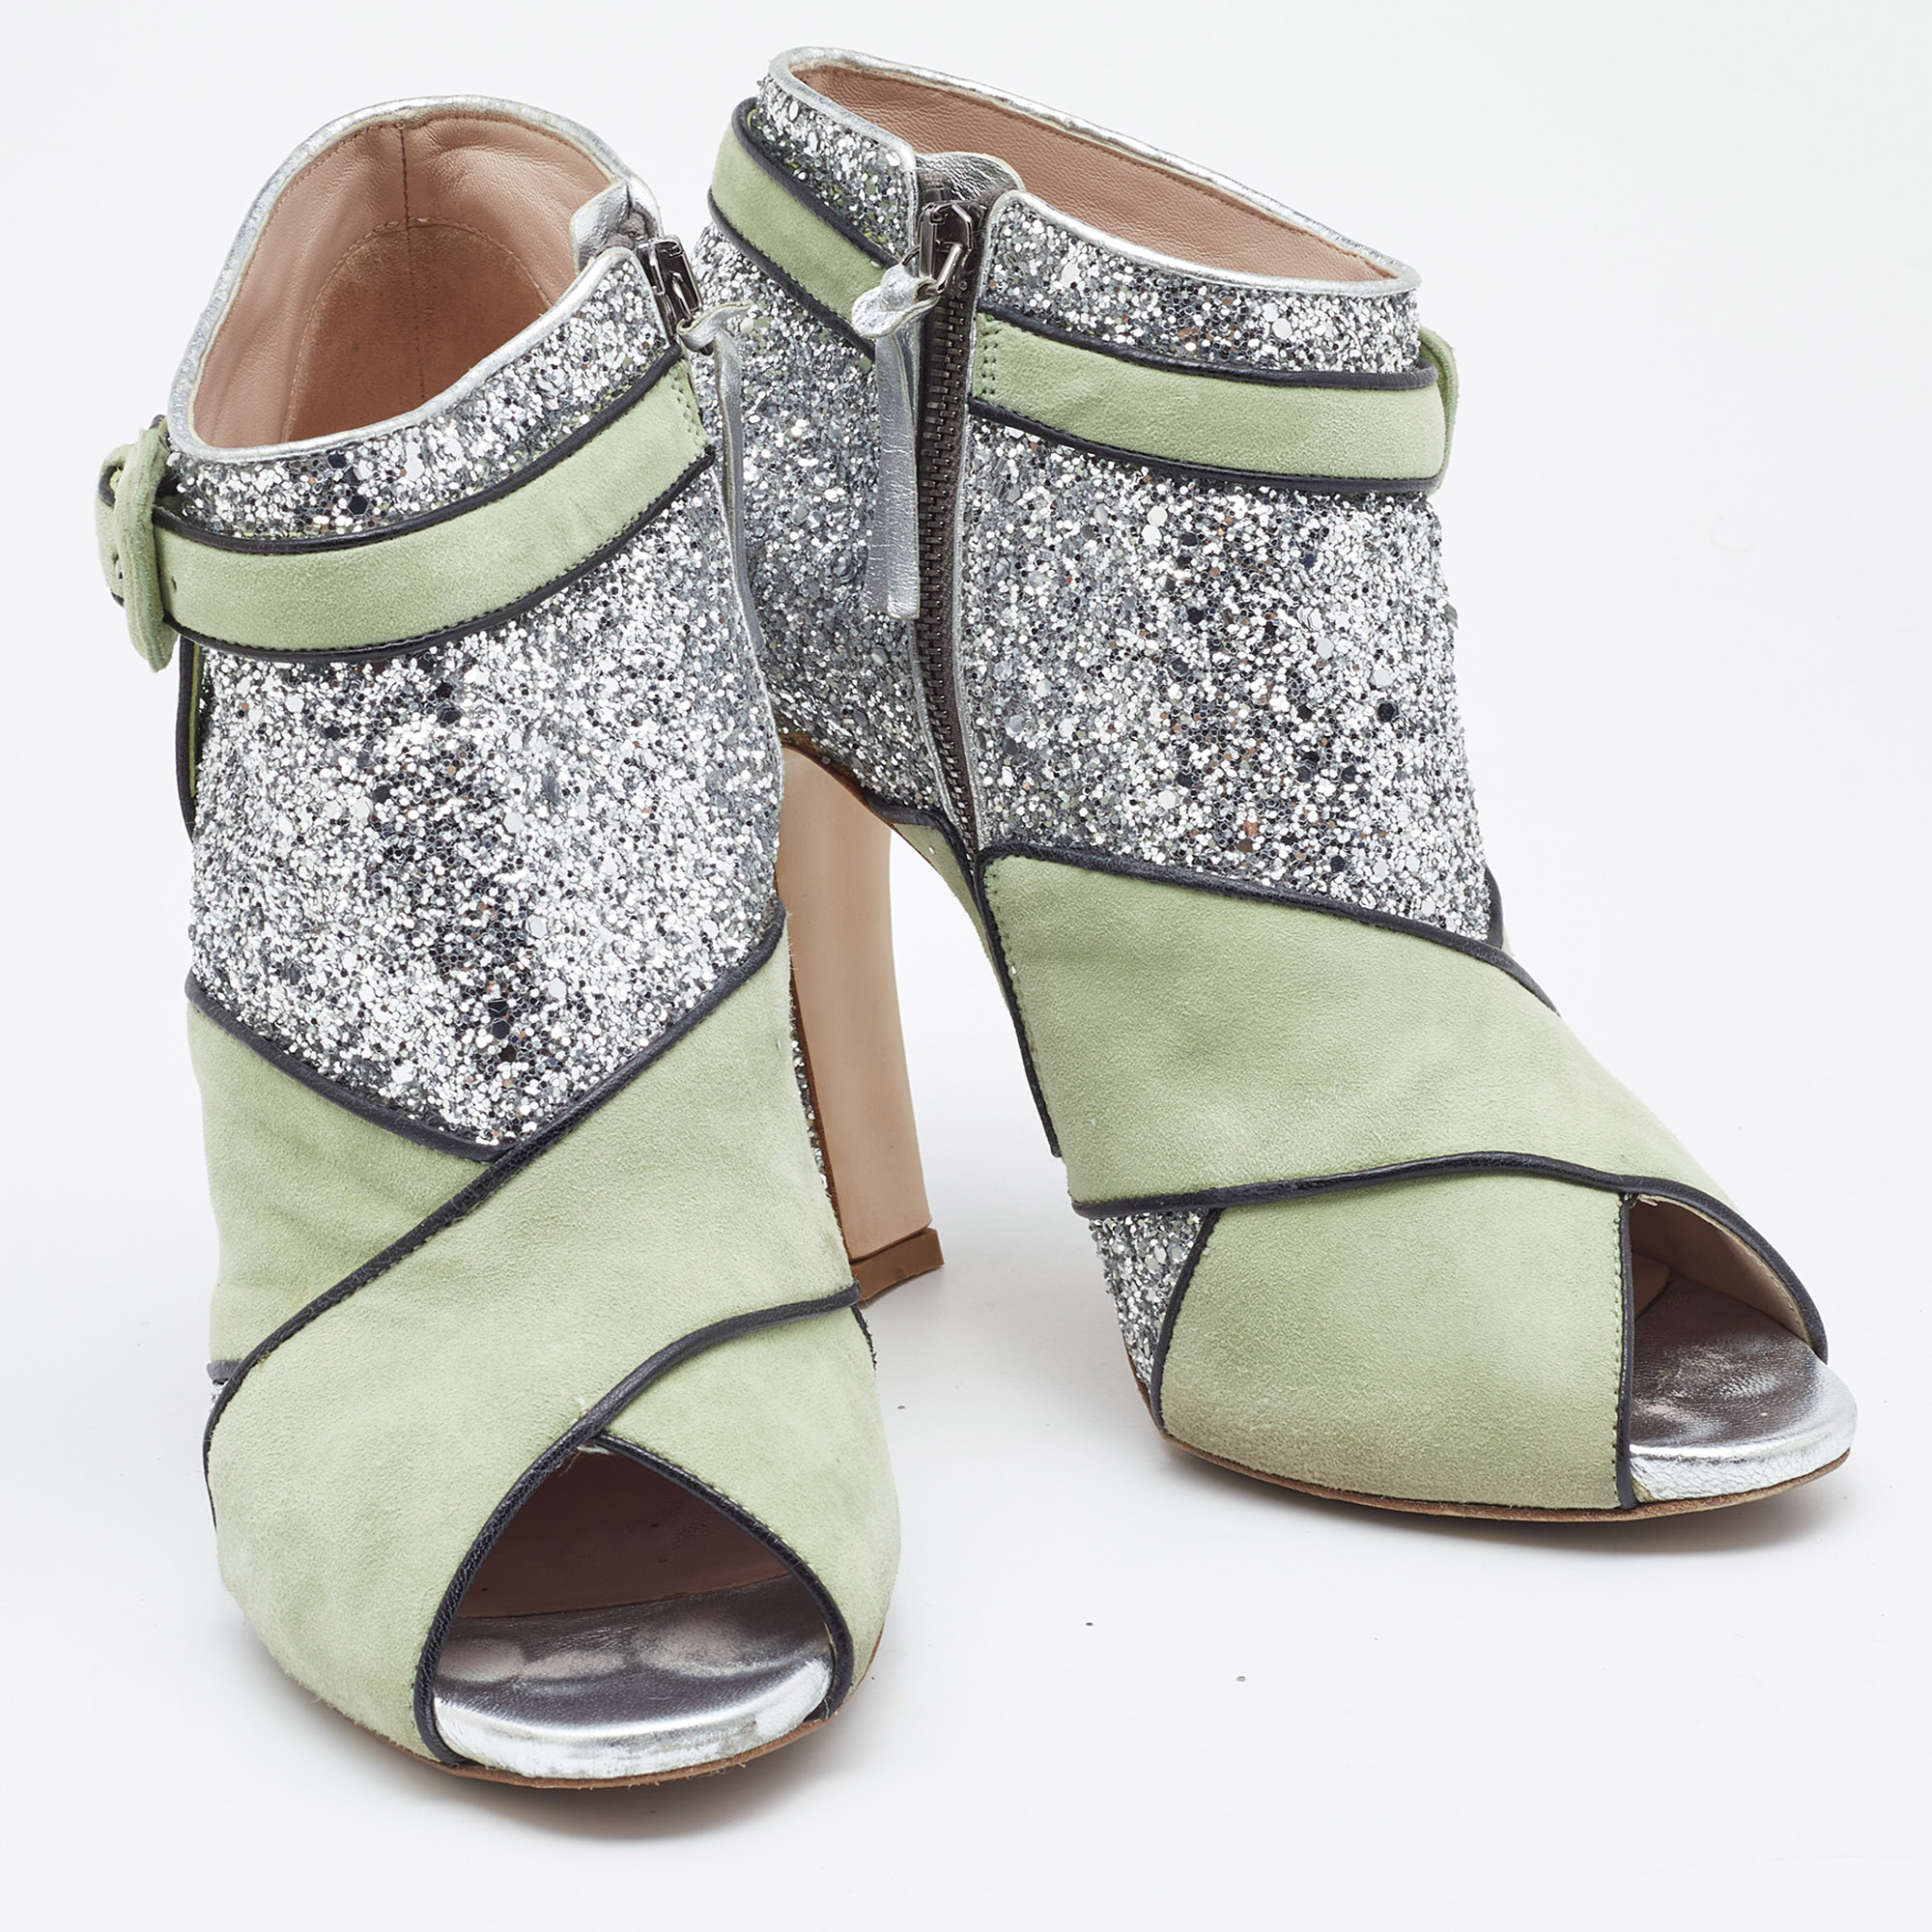 Miu Miu Green/Silver Glitter And Suede Peep-Toe Ankle Boots Size 39